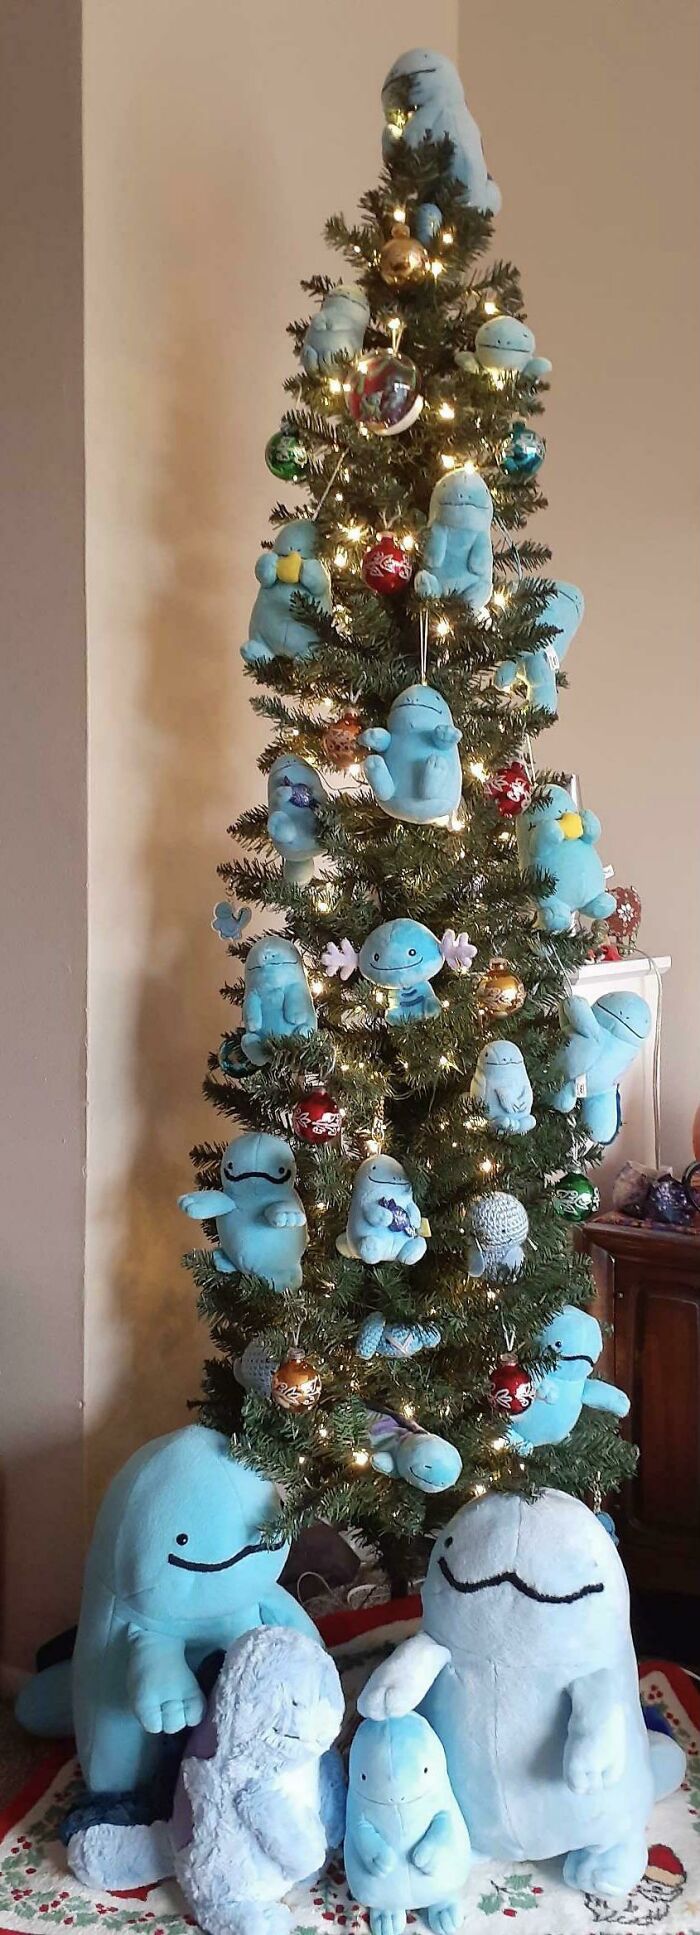 Just Have To Share My Sister's Quagsire Tree